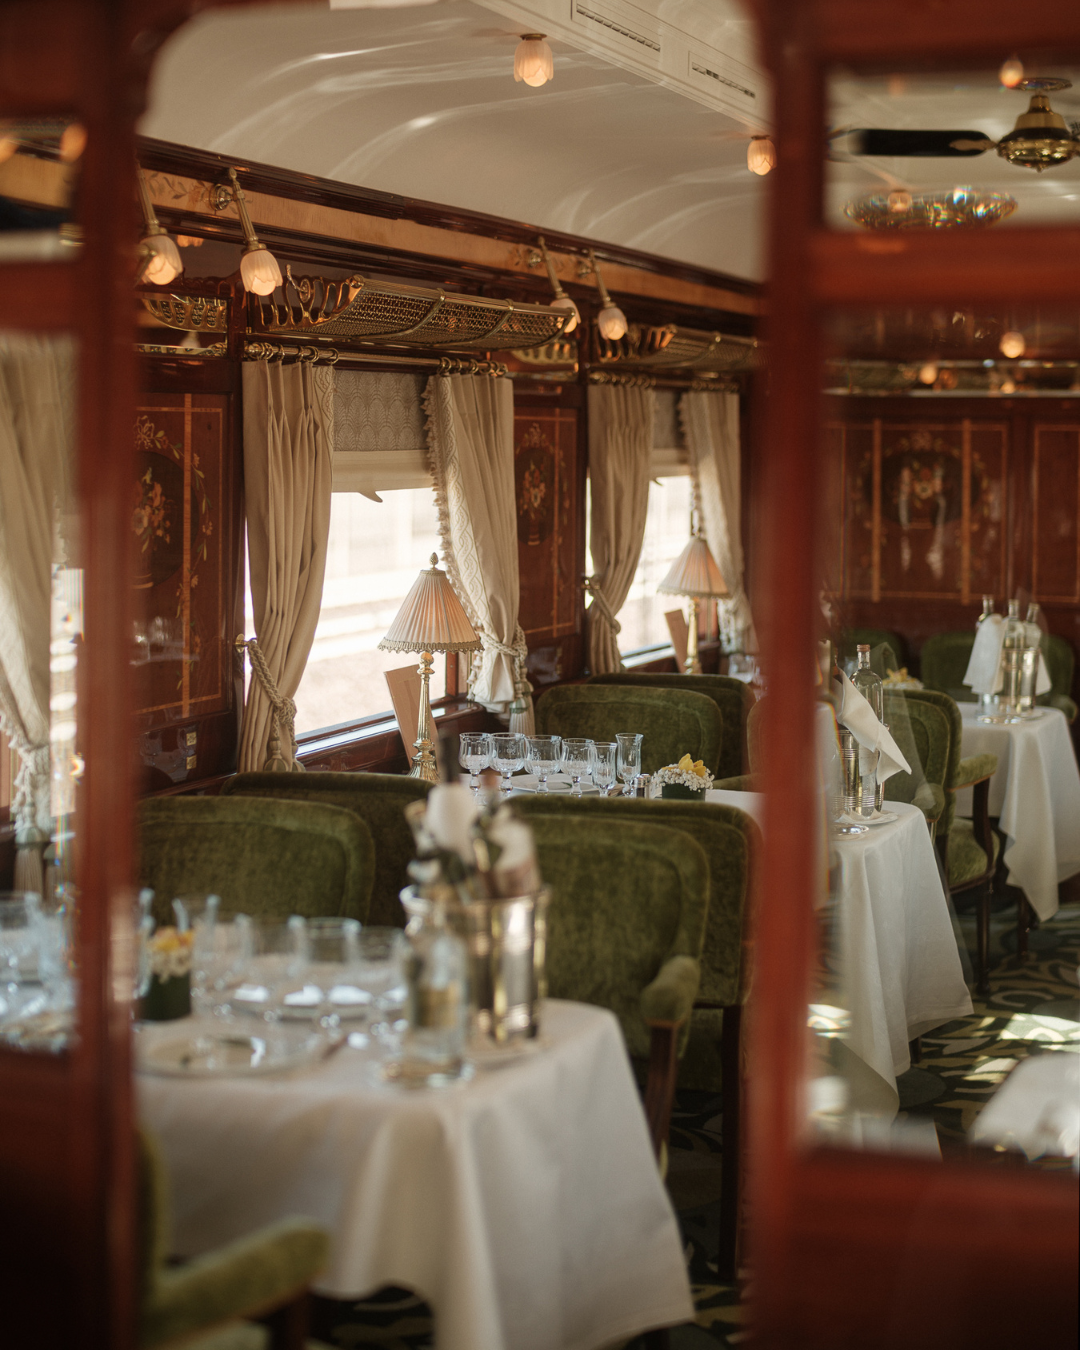 How Much It Costs To Ride Venice Simplon Orient Express, Where